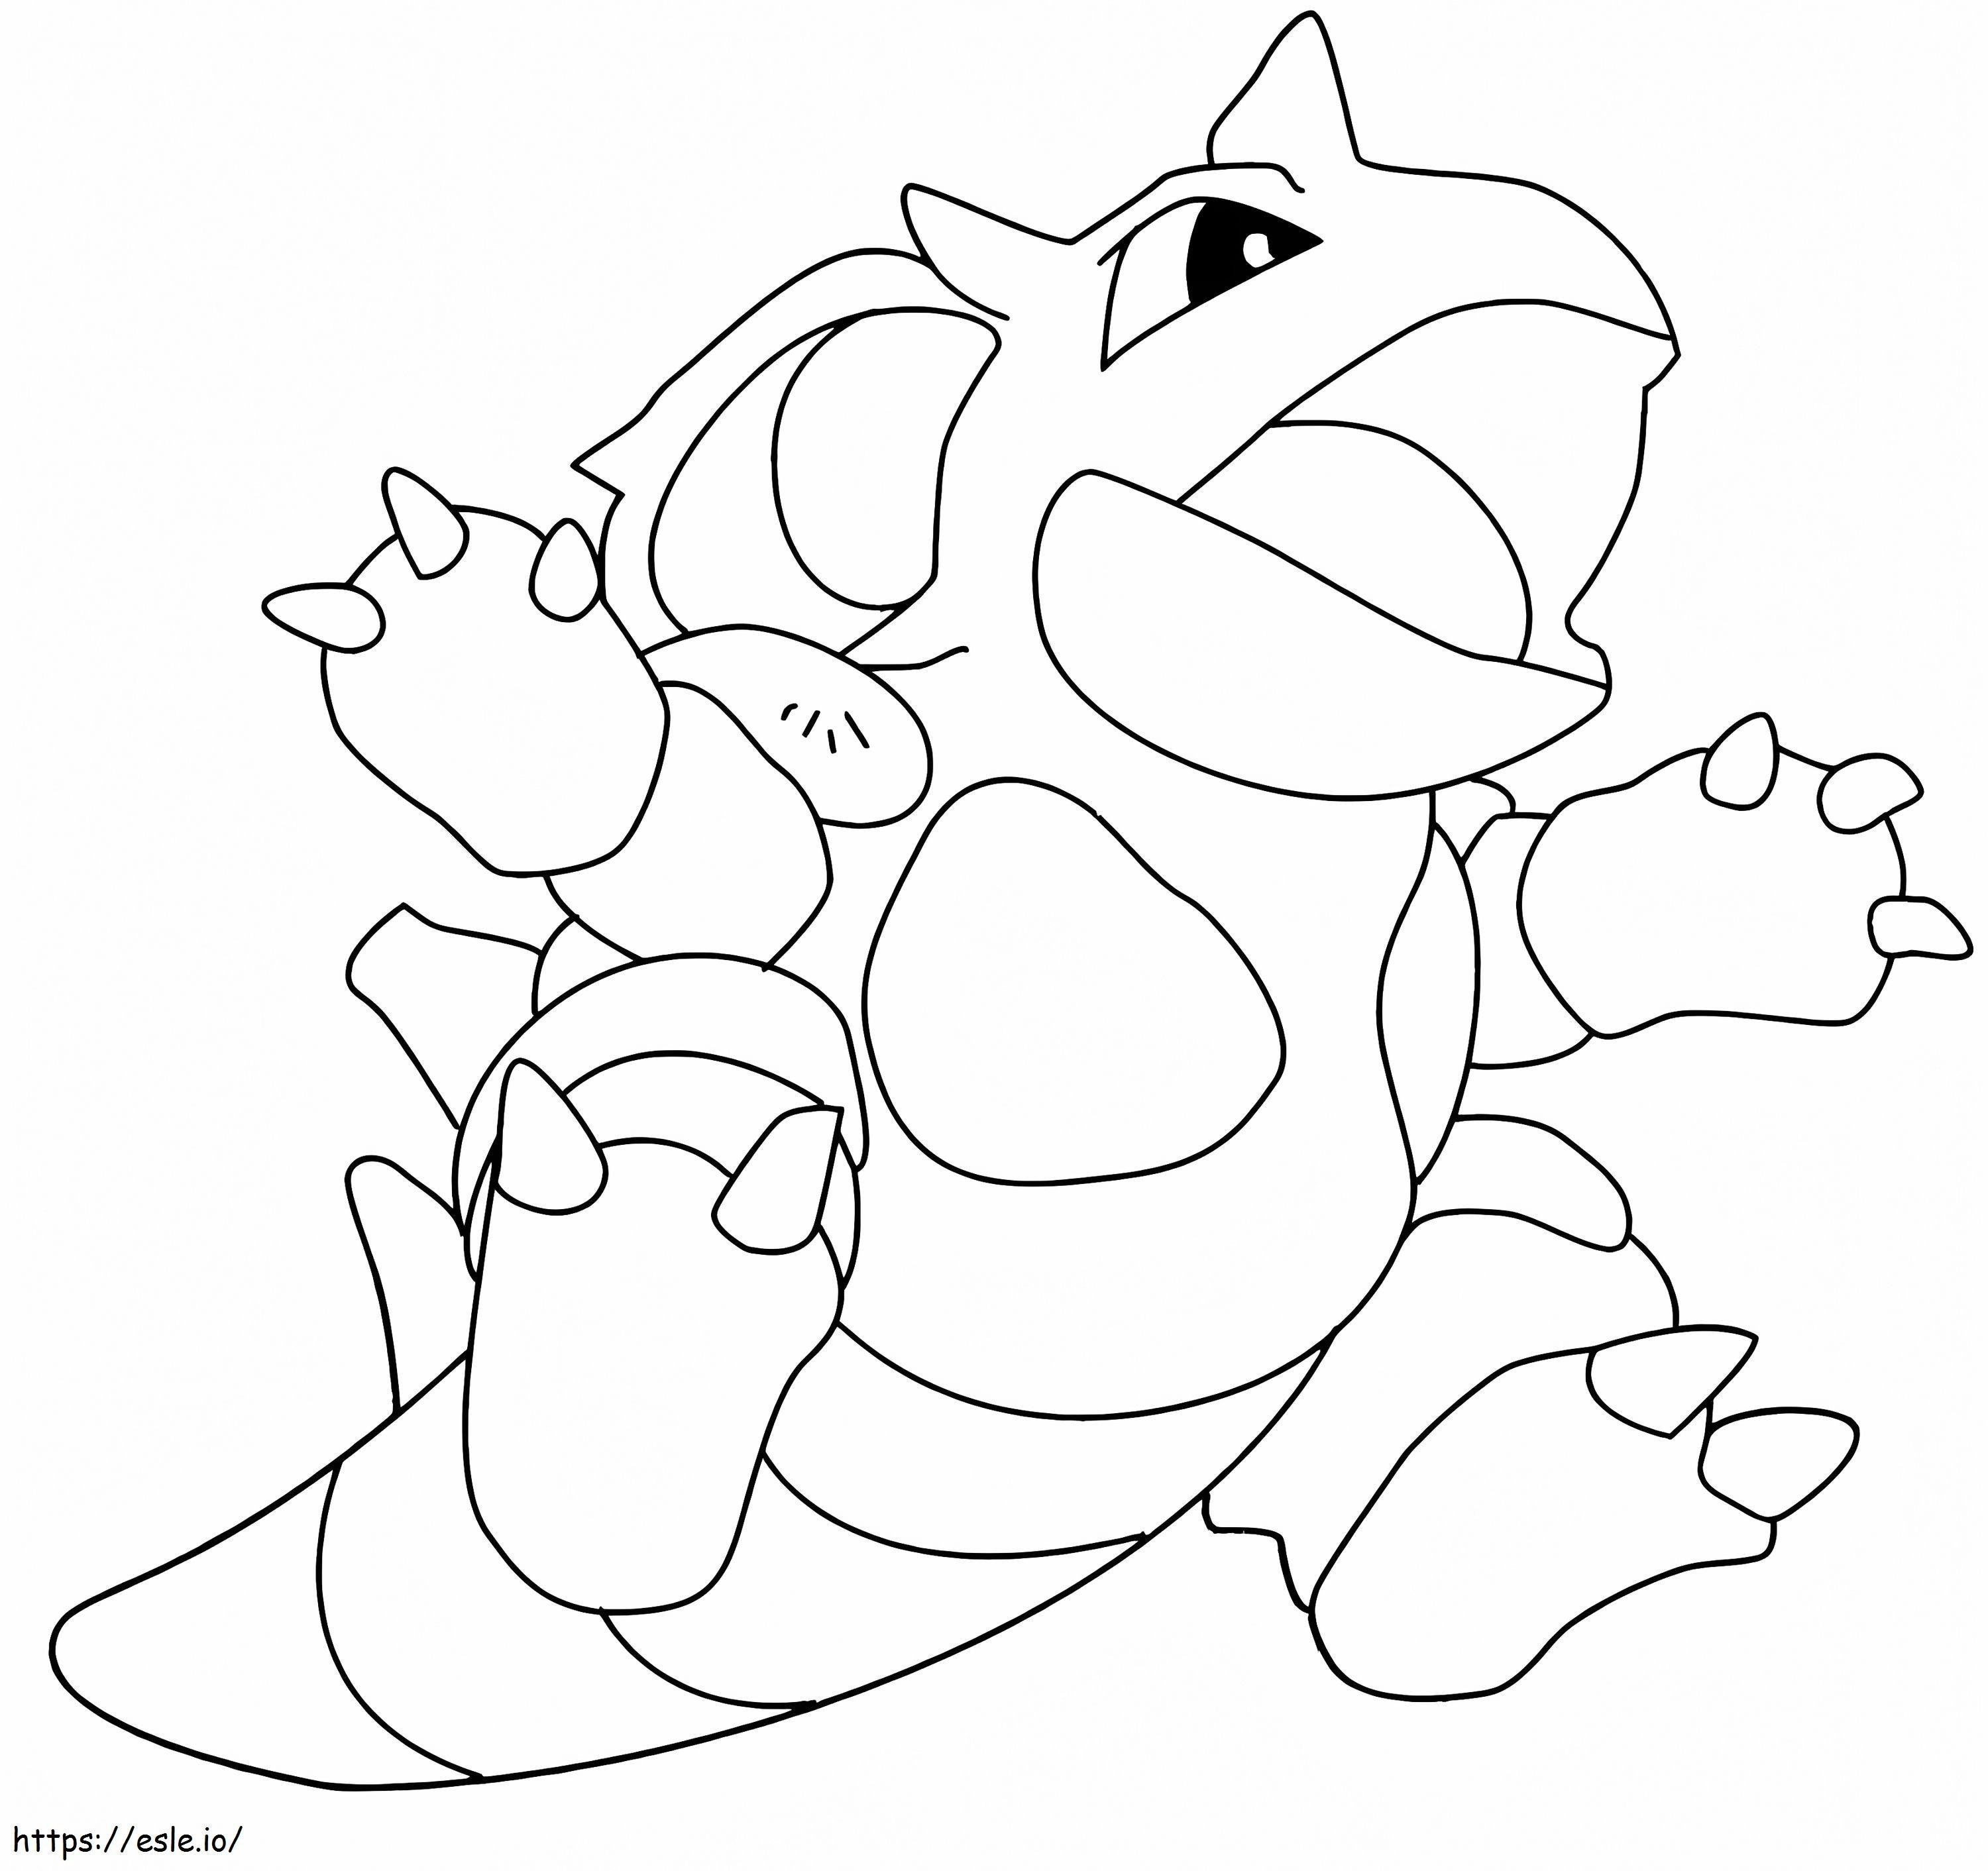 Nidoqueen 6 coloring page